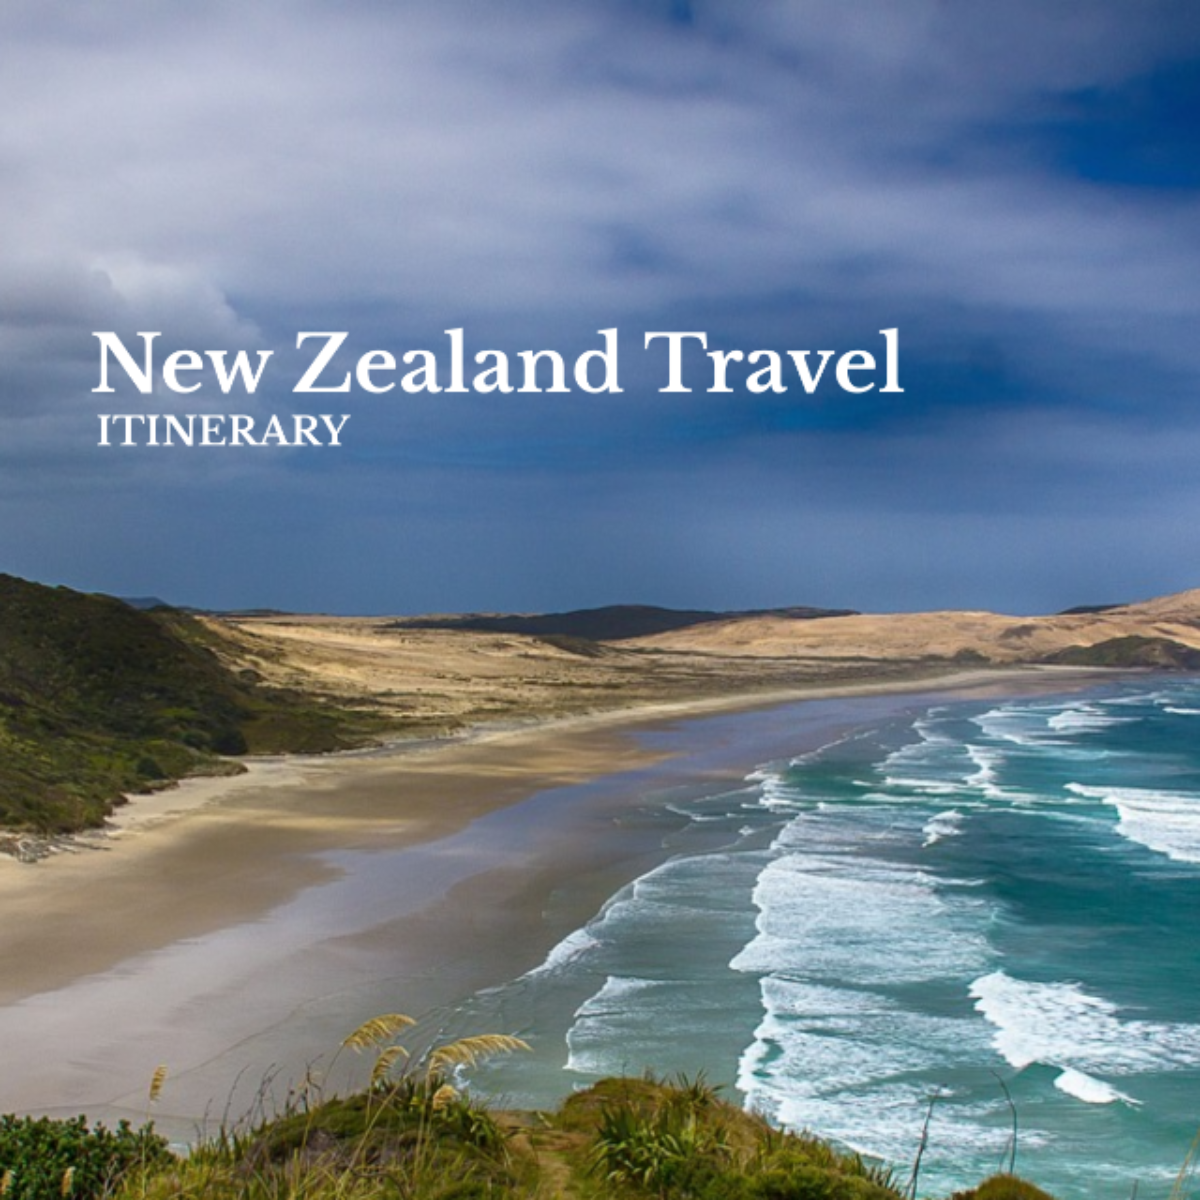 New Zealand Travel Itinerary Template